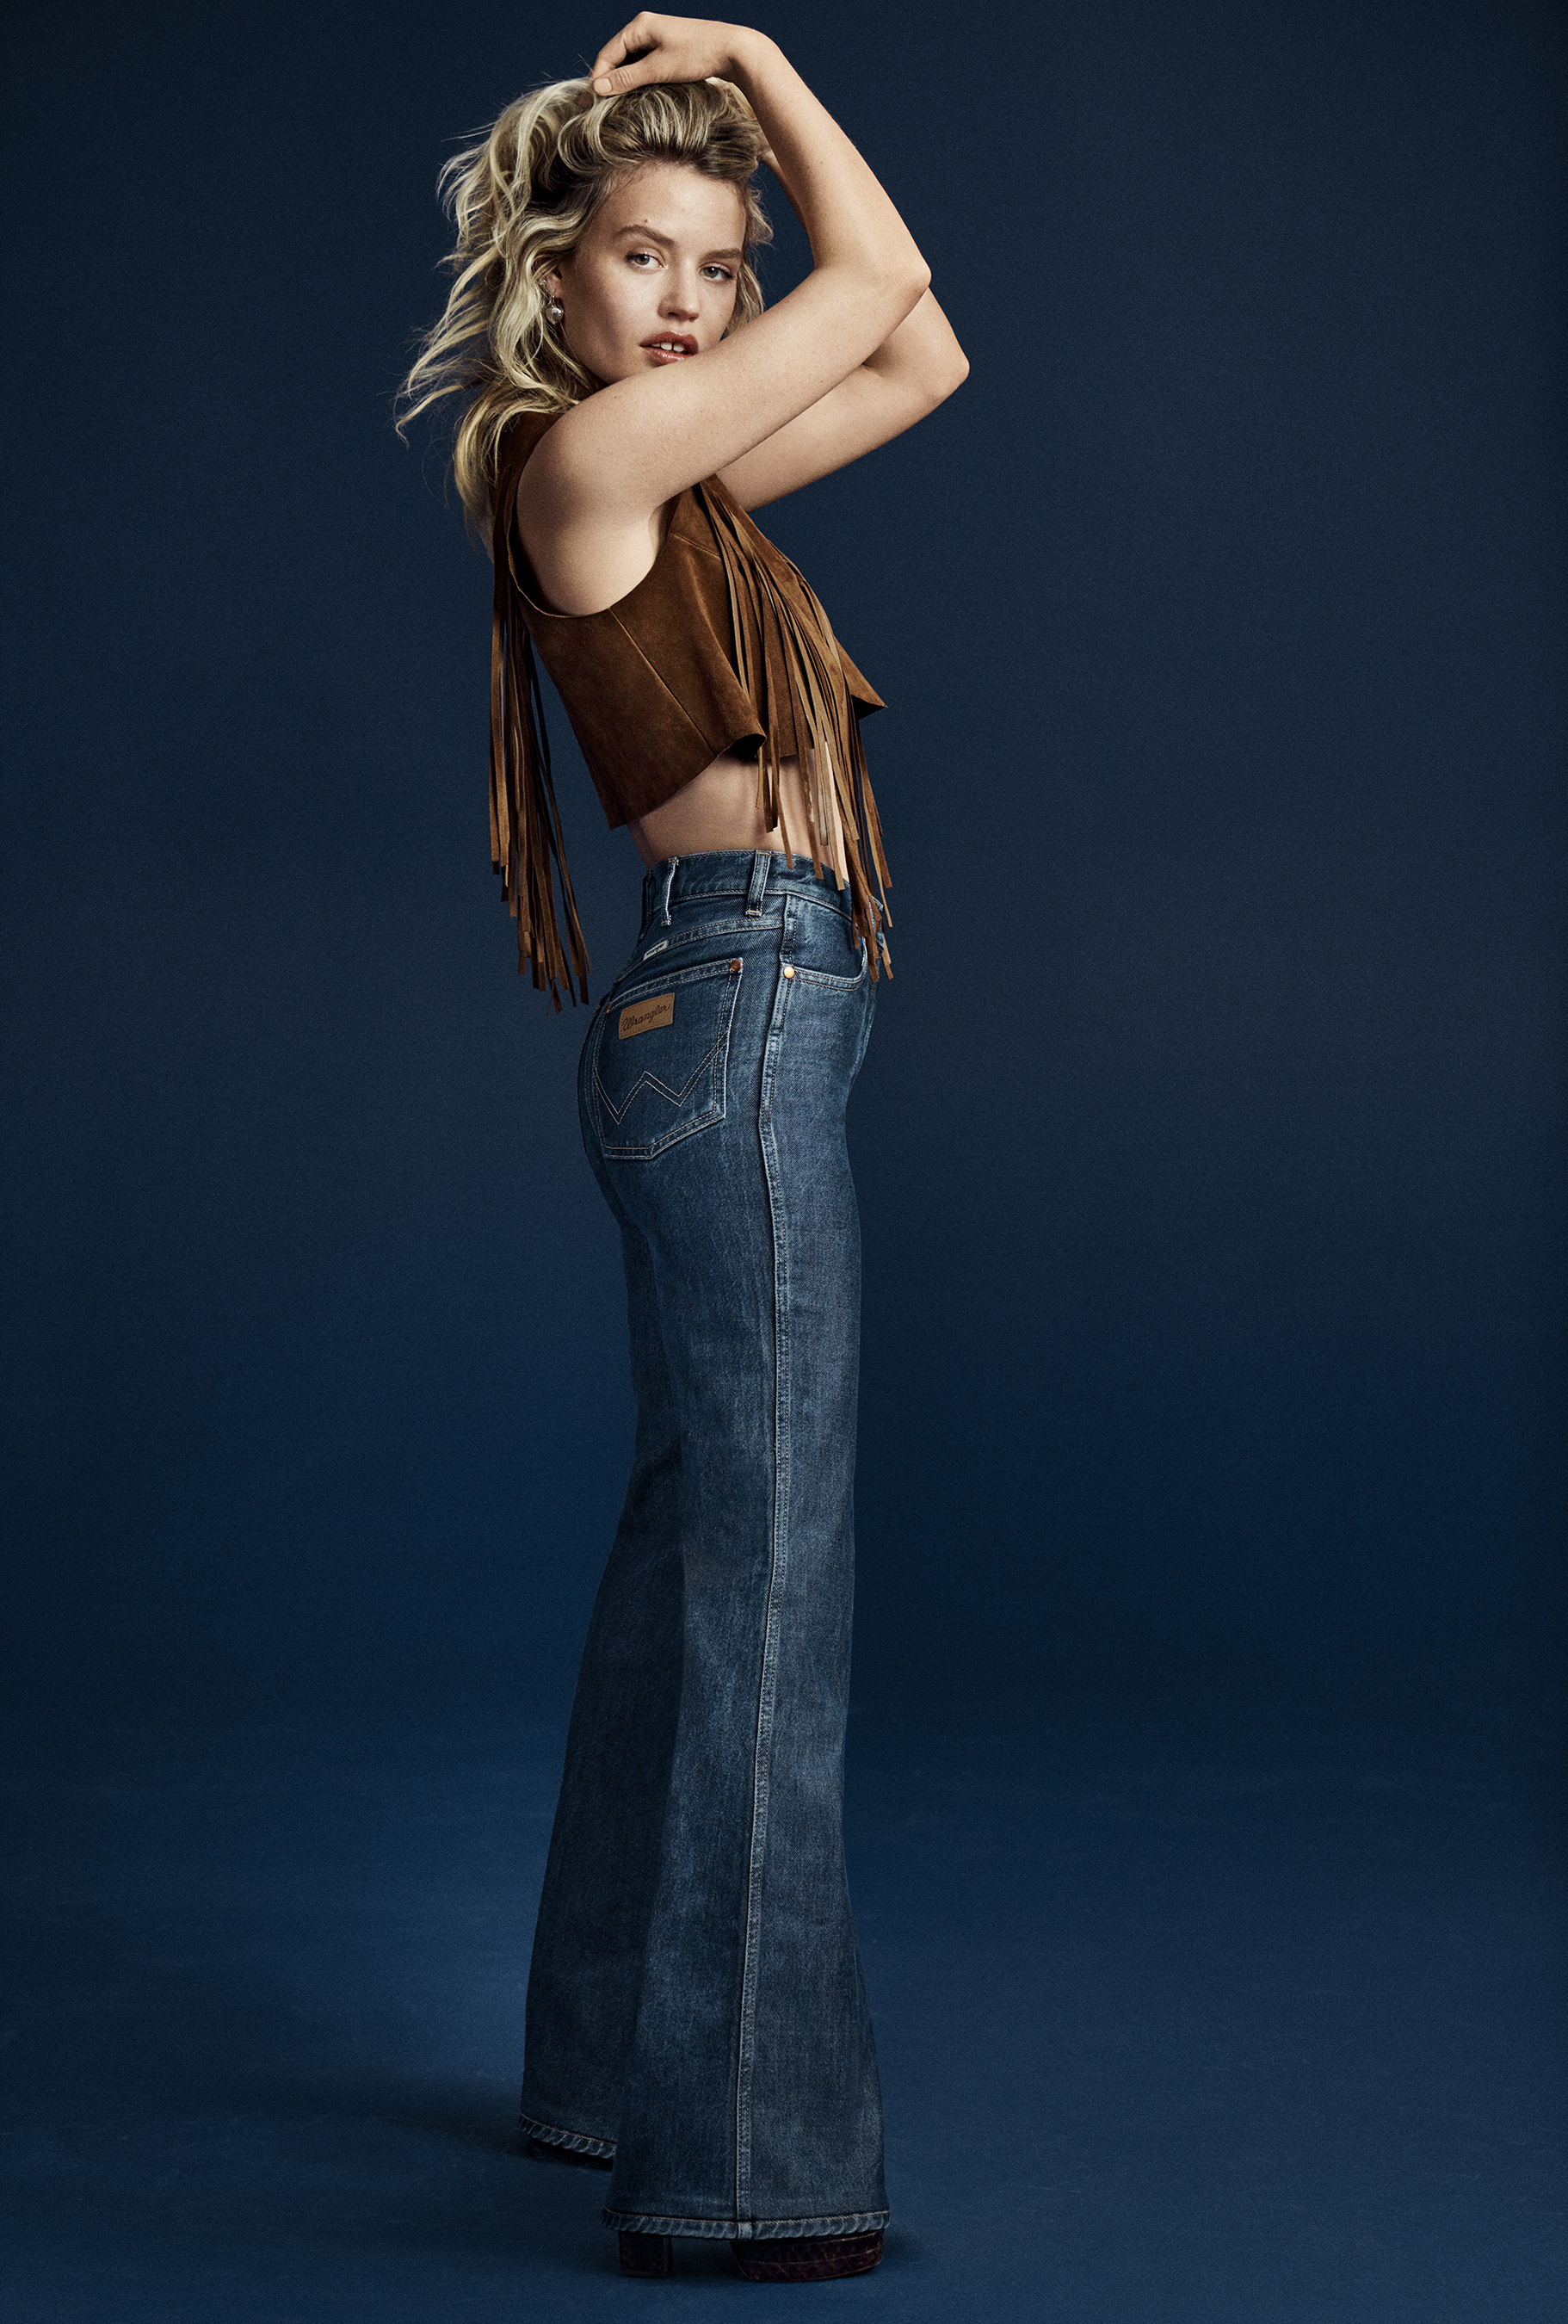 Wrangler® Announces Georgia May Jagger as the Face of Its Heritage Women's  Denim Collection | Business Wire